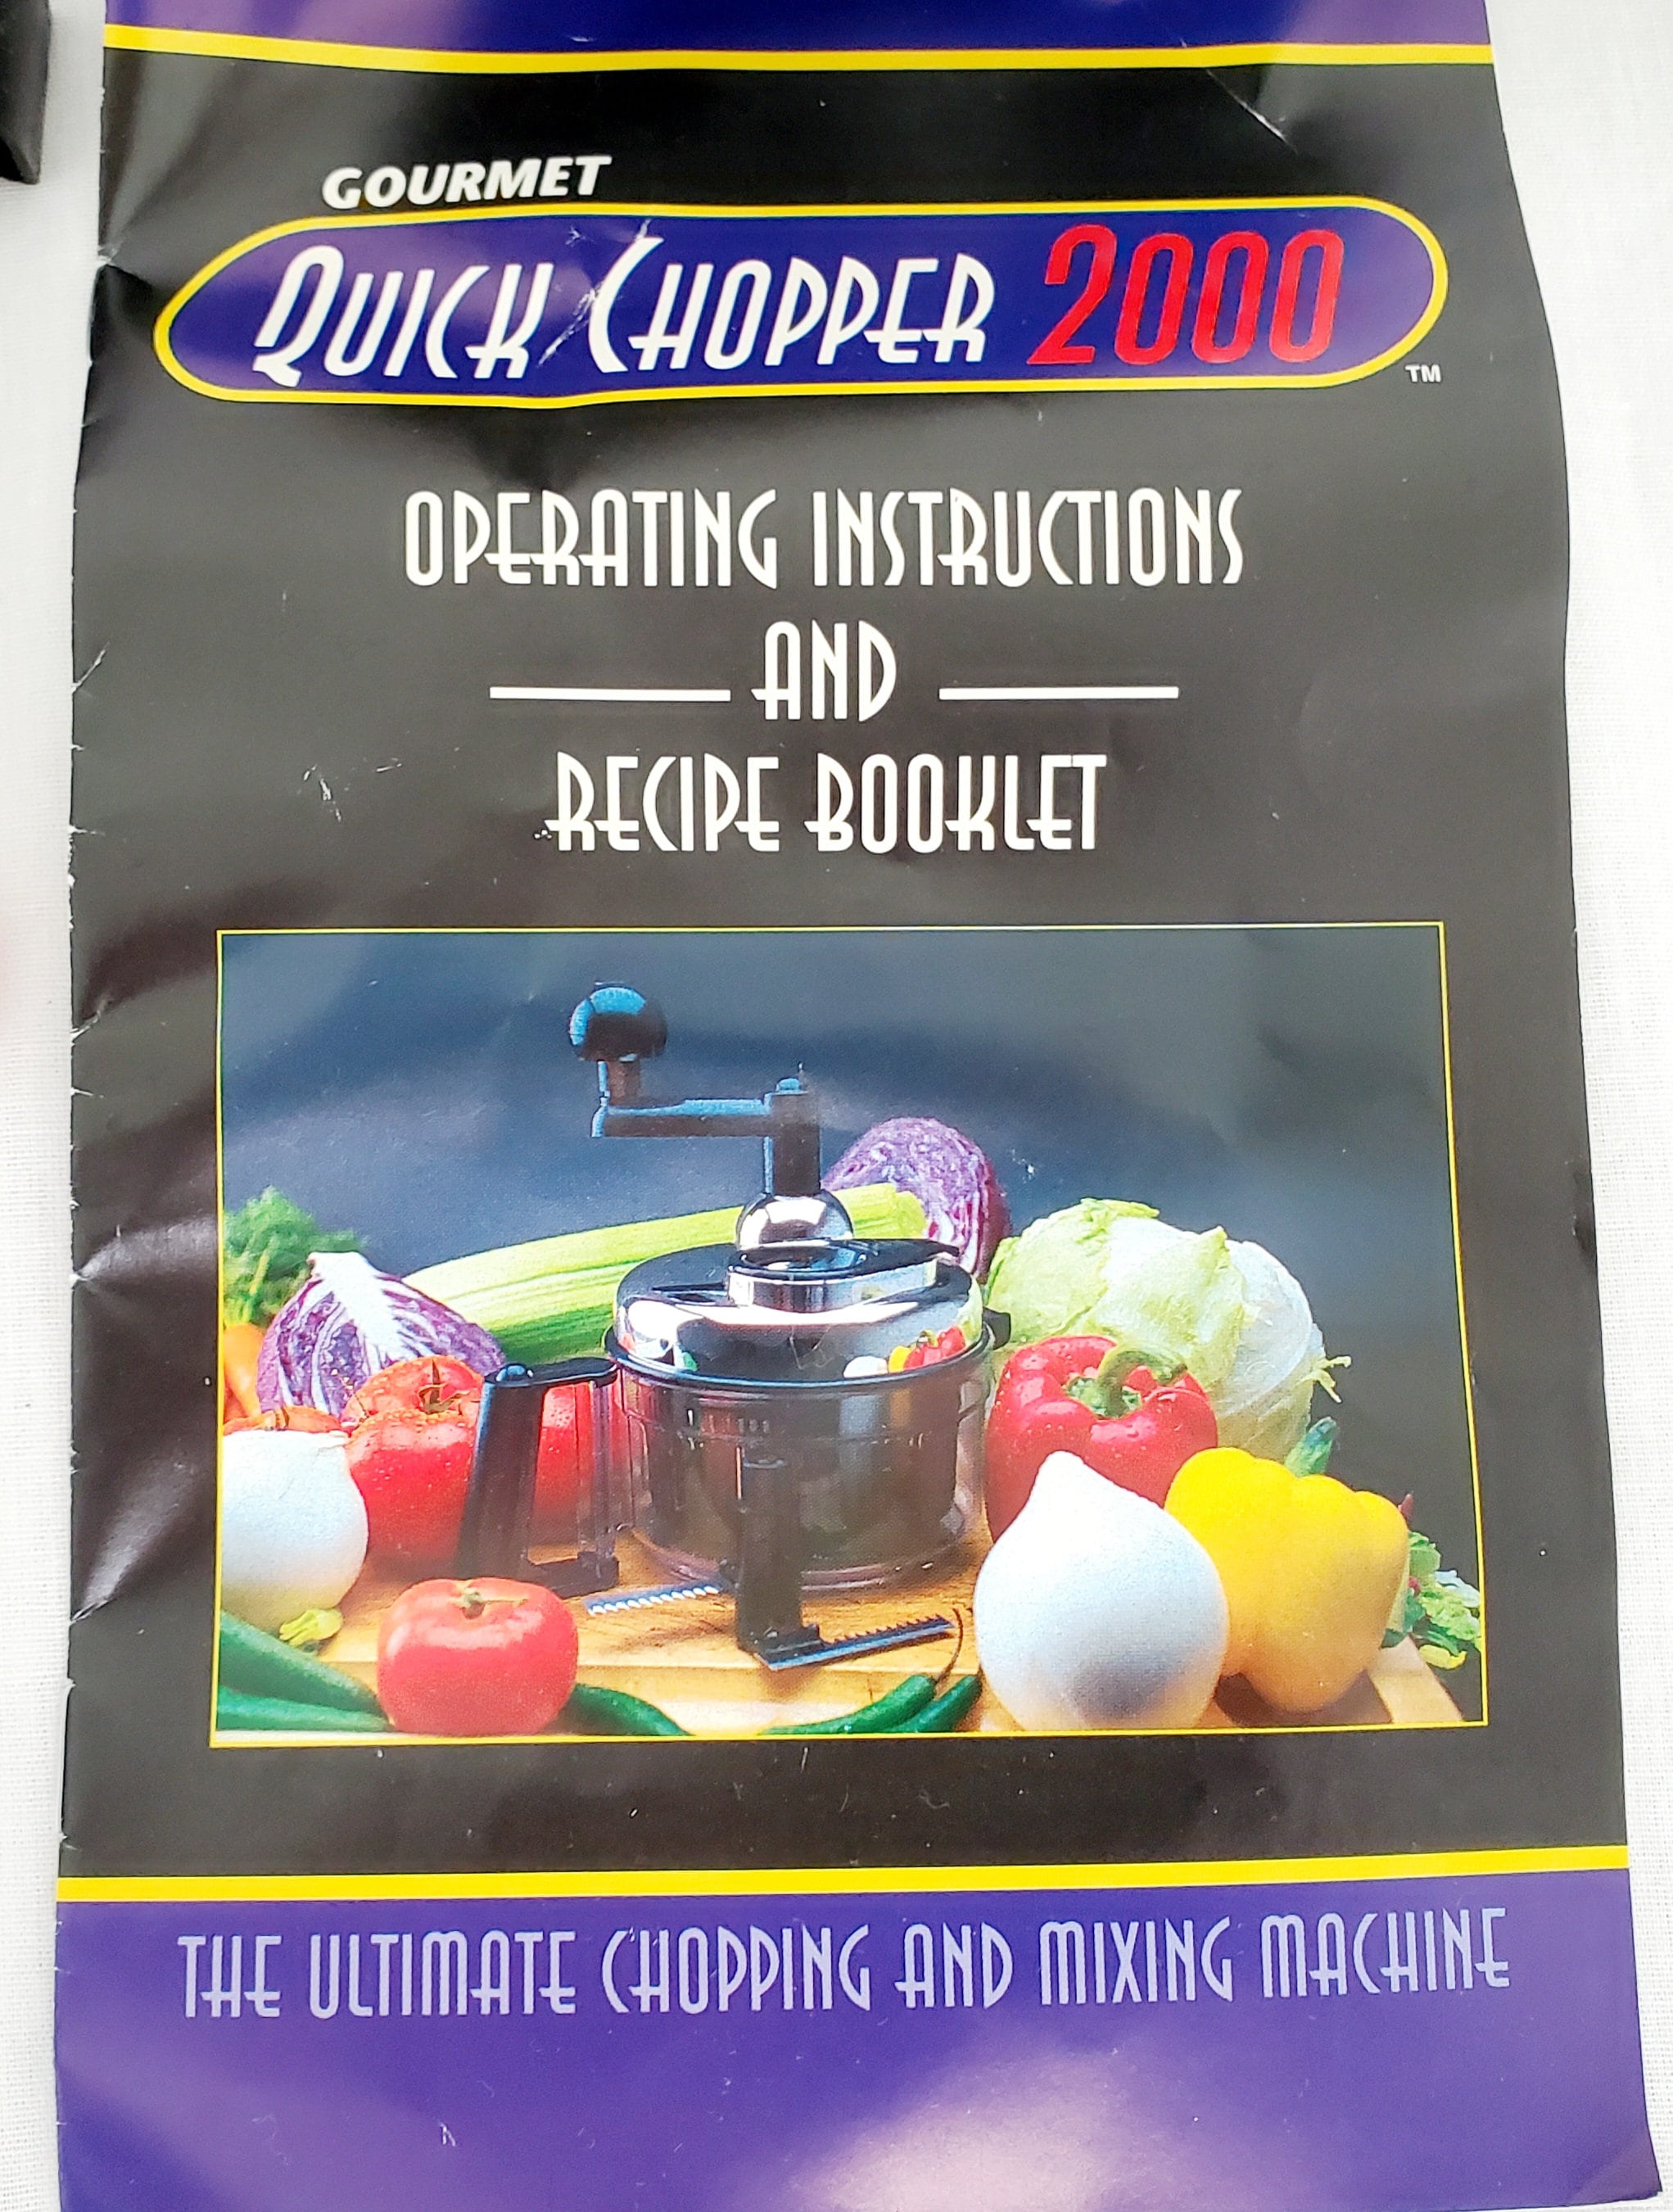 Vintage Gourmet Quick Chopper 2000 Has Never Been Used and is in